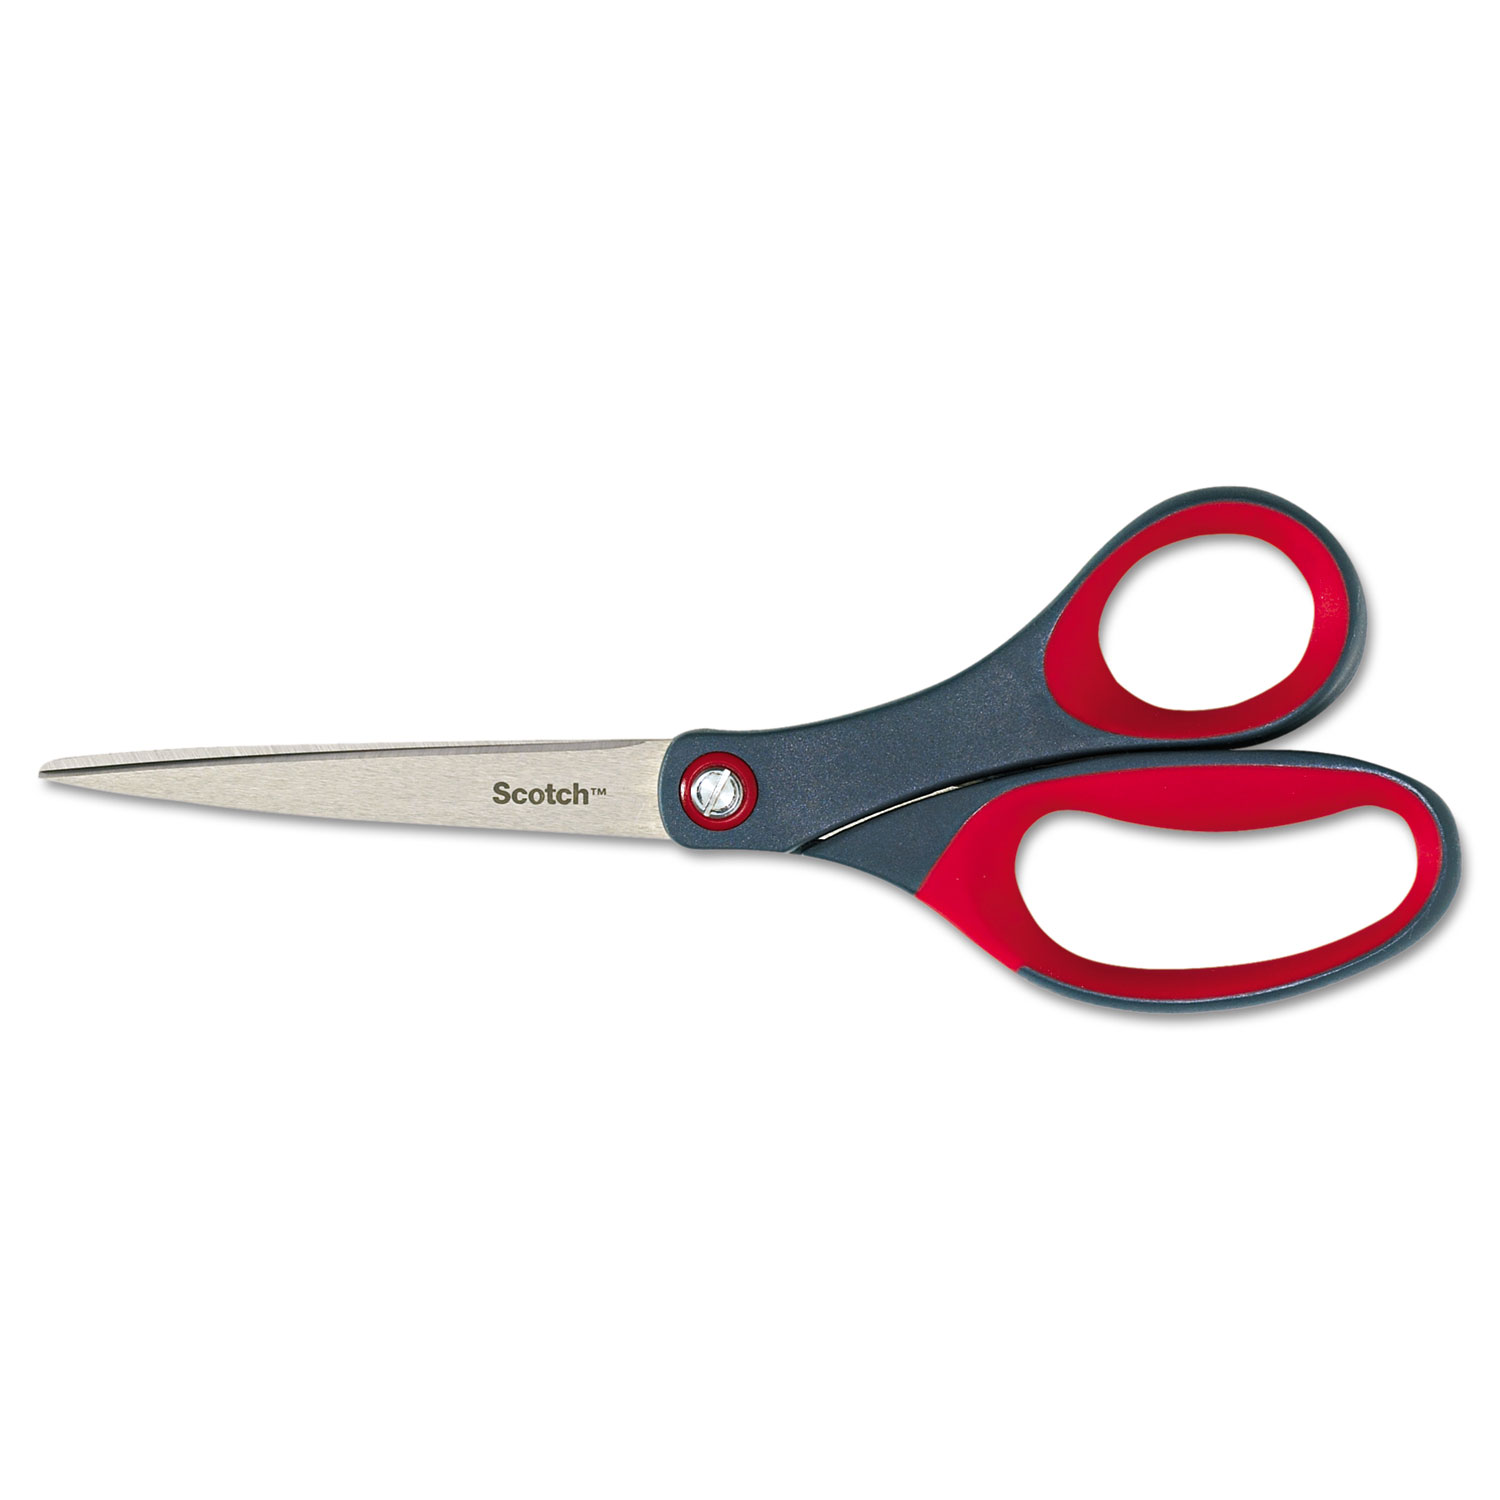 Scotch 3.5-in Stainless Steel Soft Touch Overmold Scissors in the